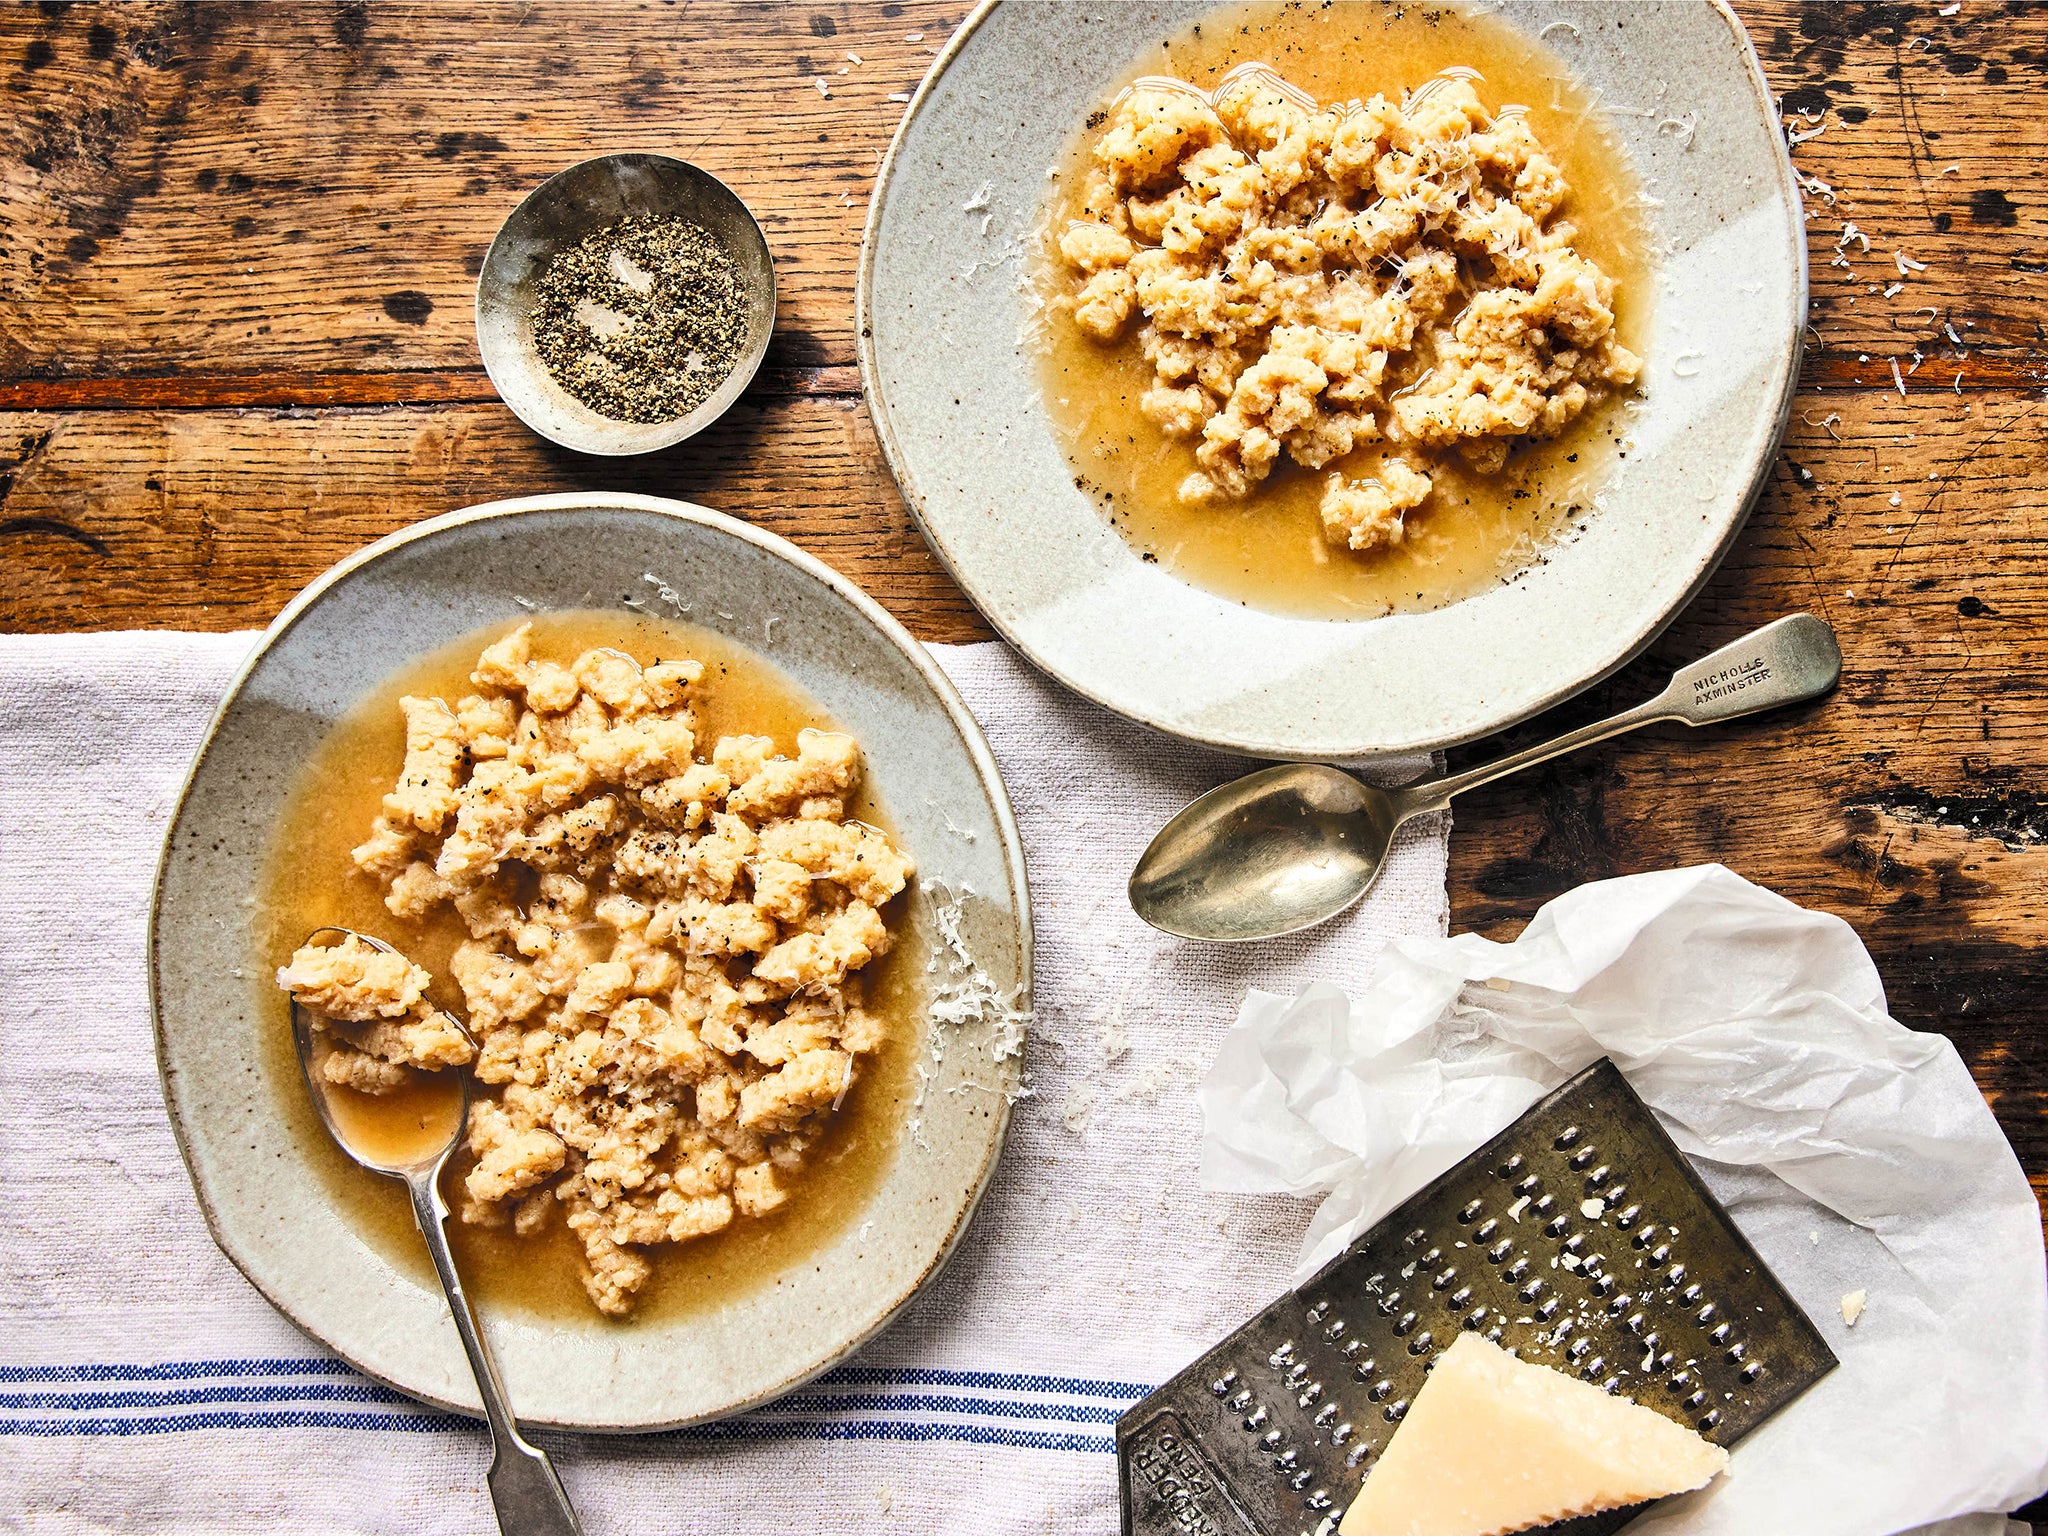 This pasta – passatelli in brodo – is a great way to use up leftovers